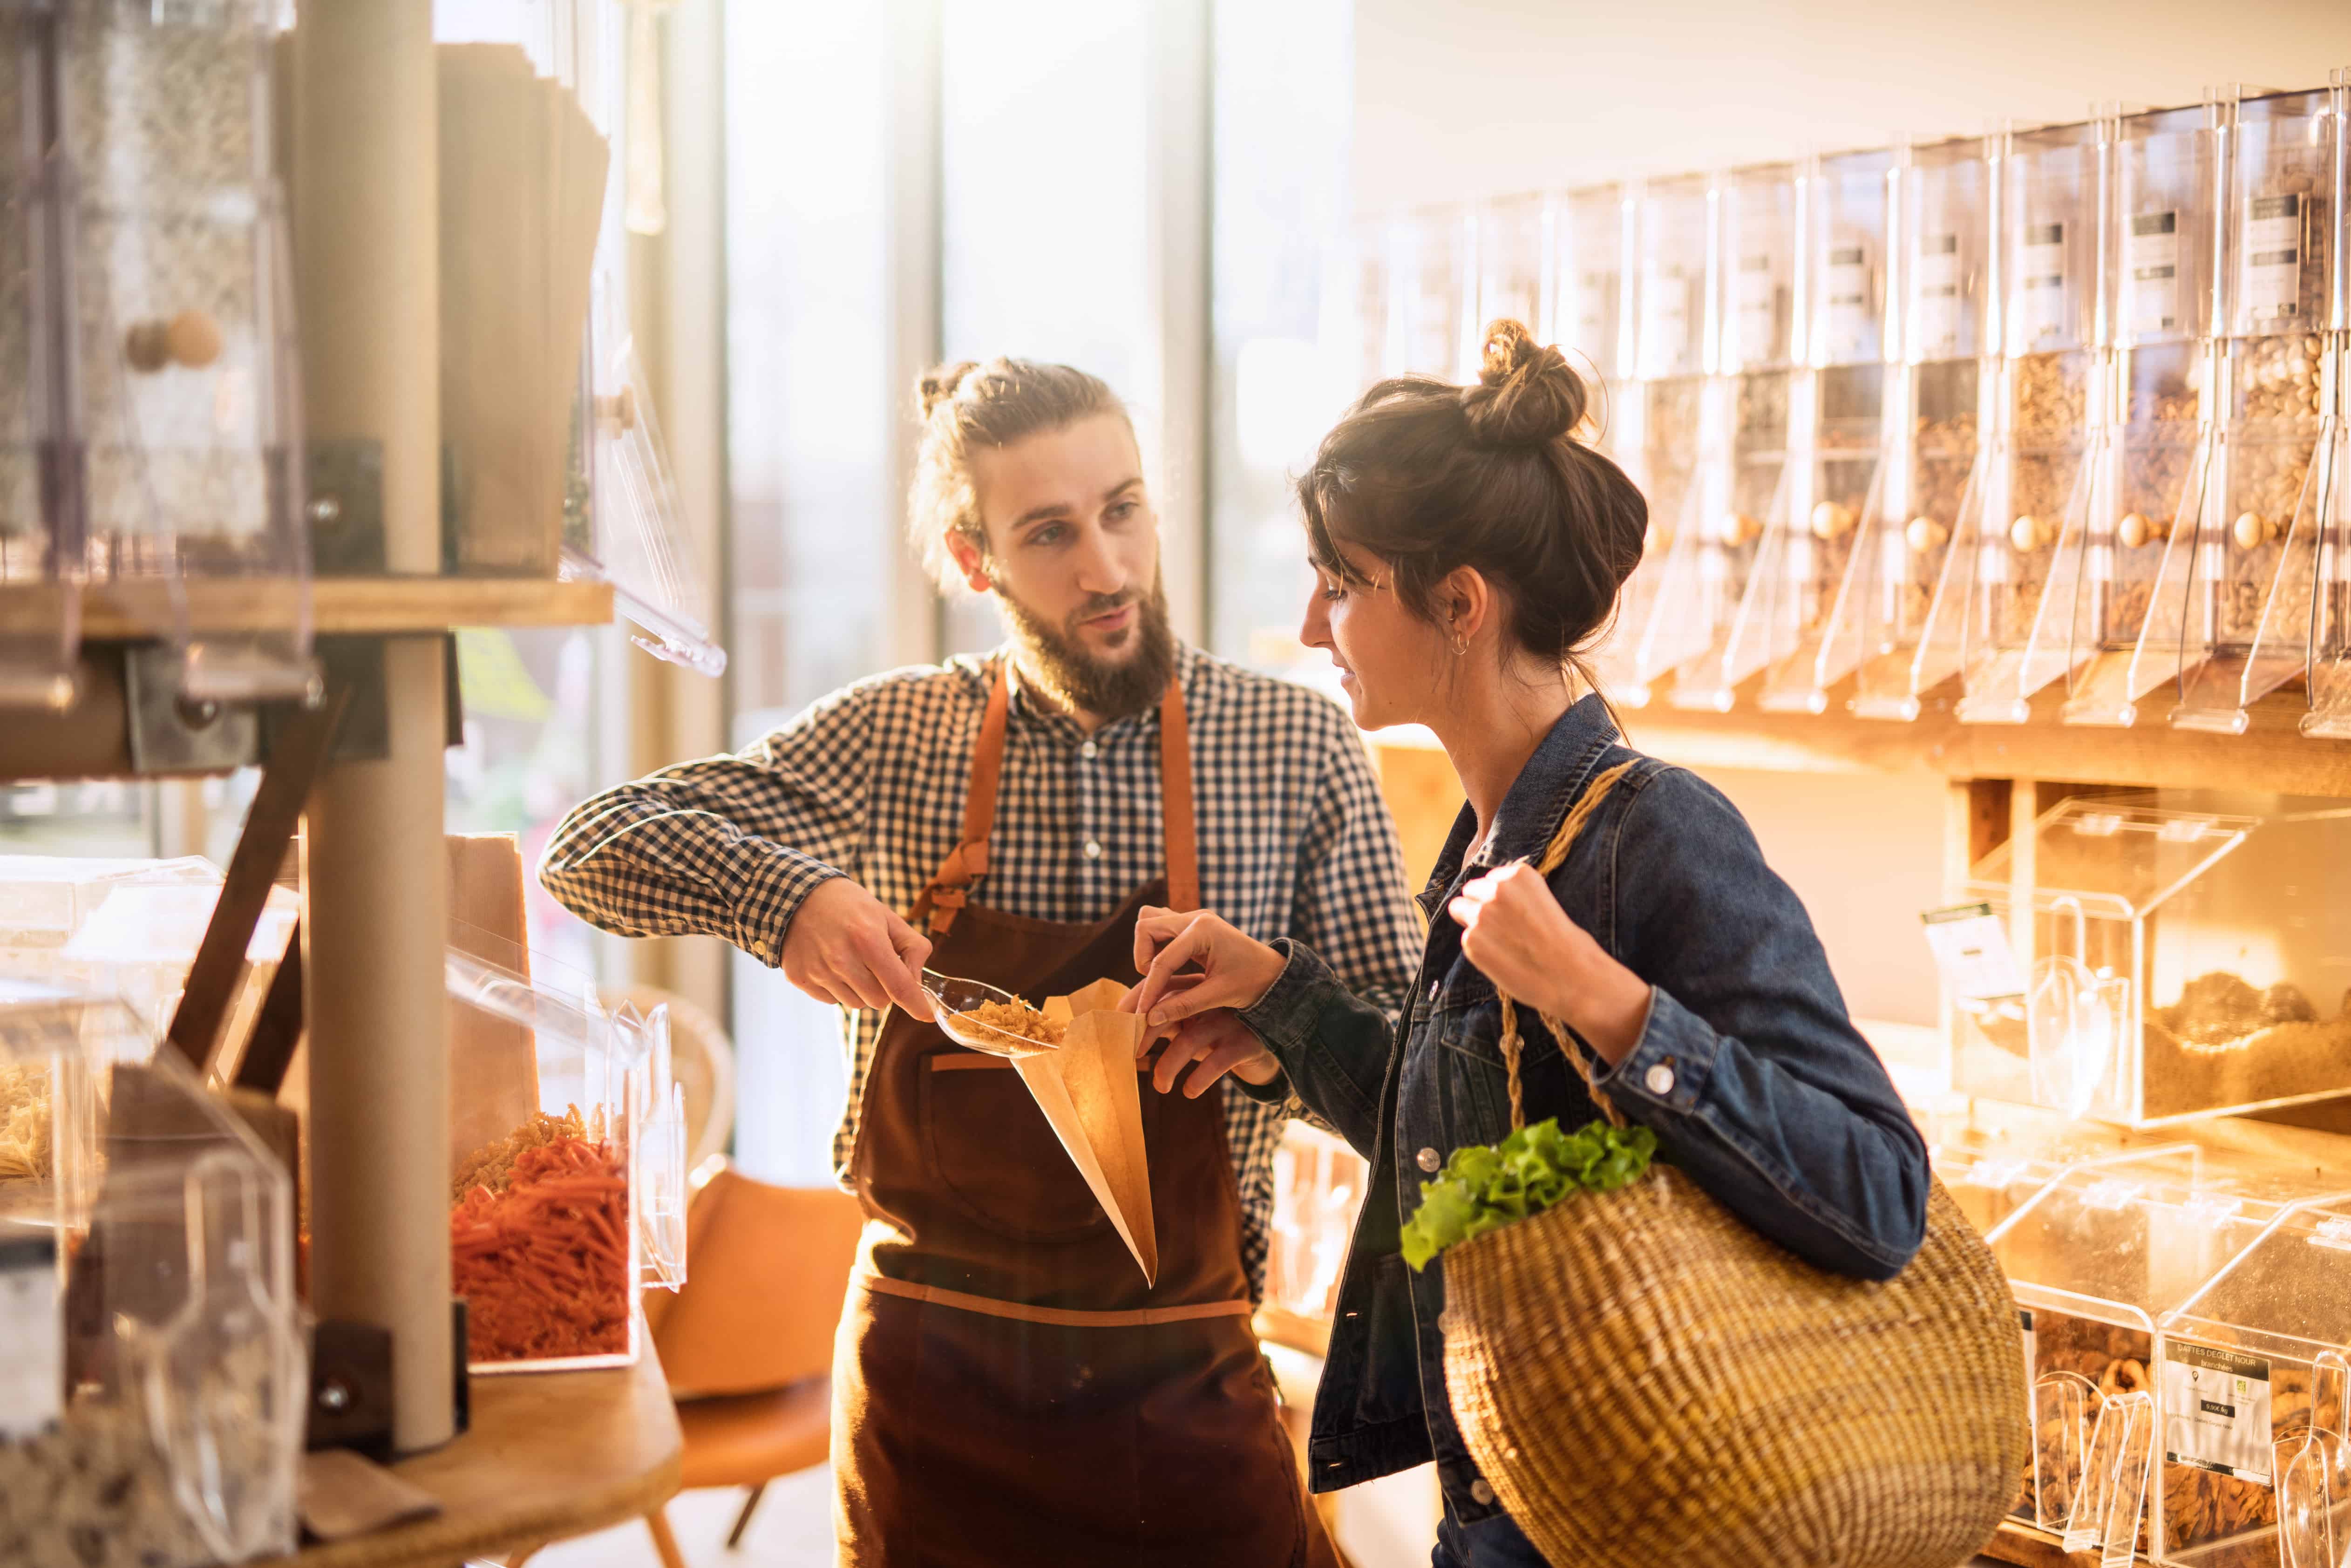 A Guide to Customer Retention for Brick-and-Mortar Businesses